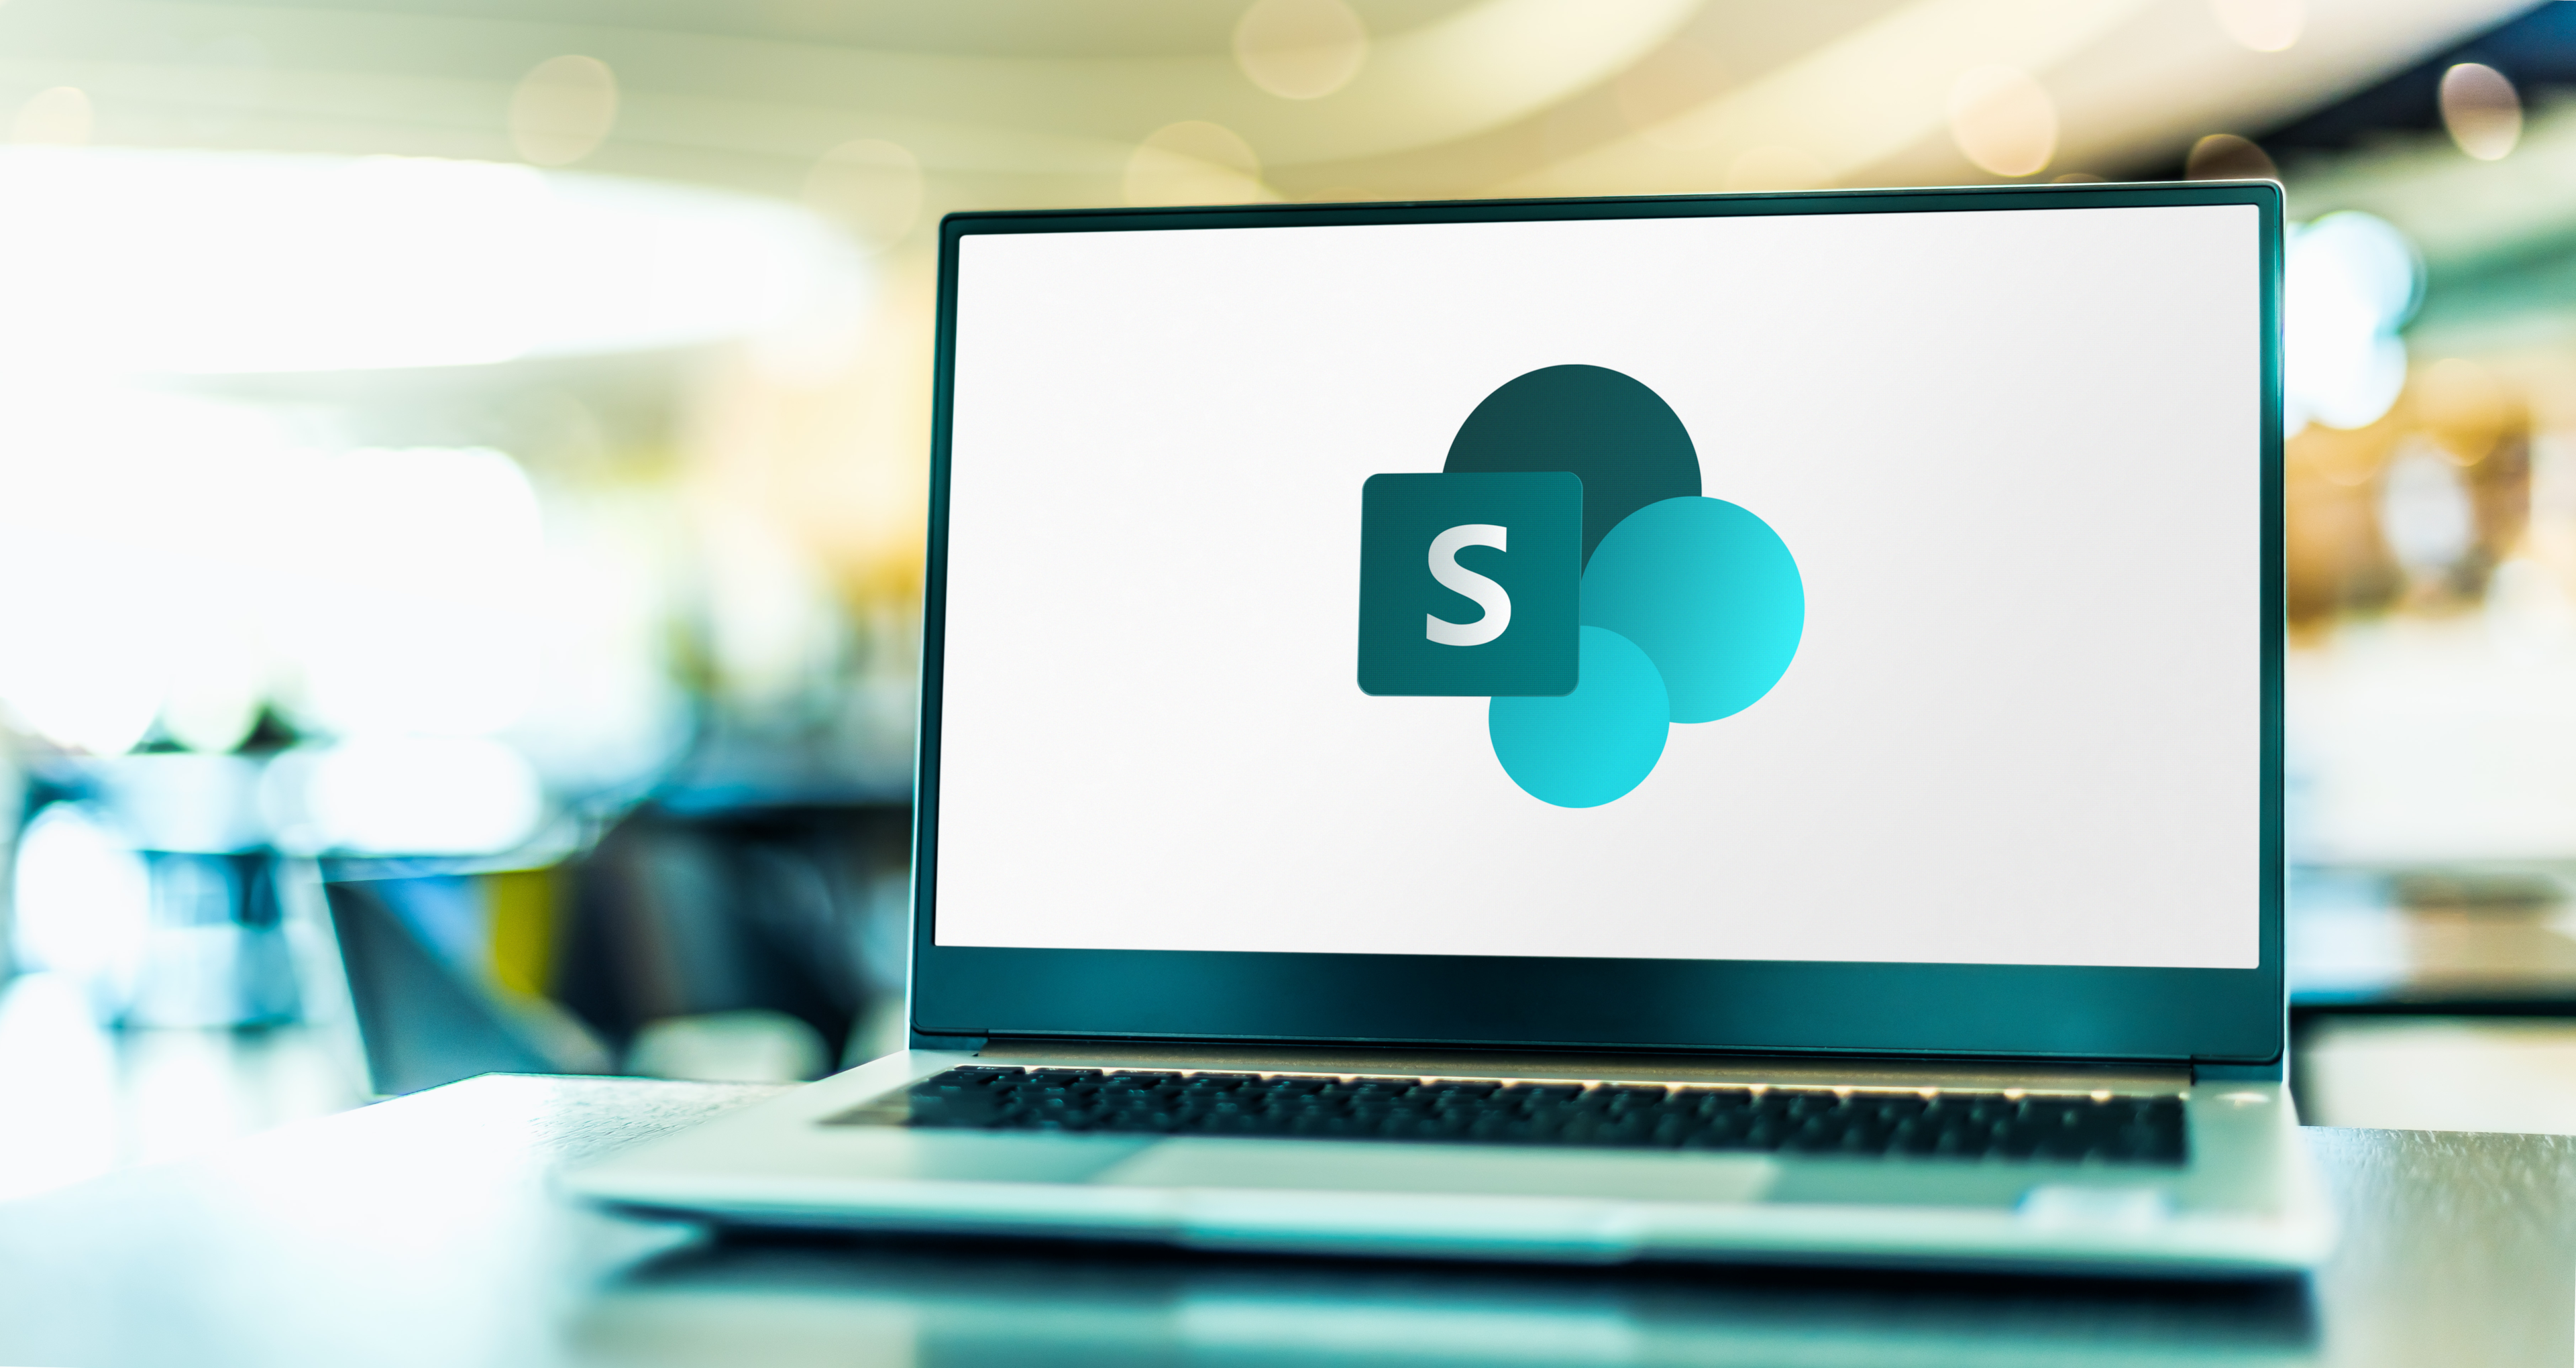 Microsoft SharePoint is the Future of Business. Here's Why.